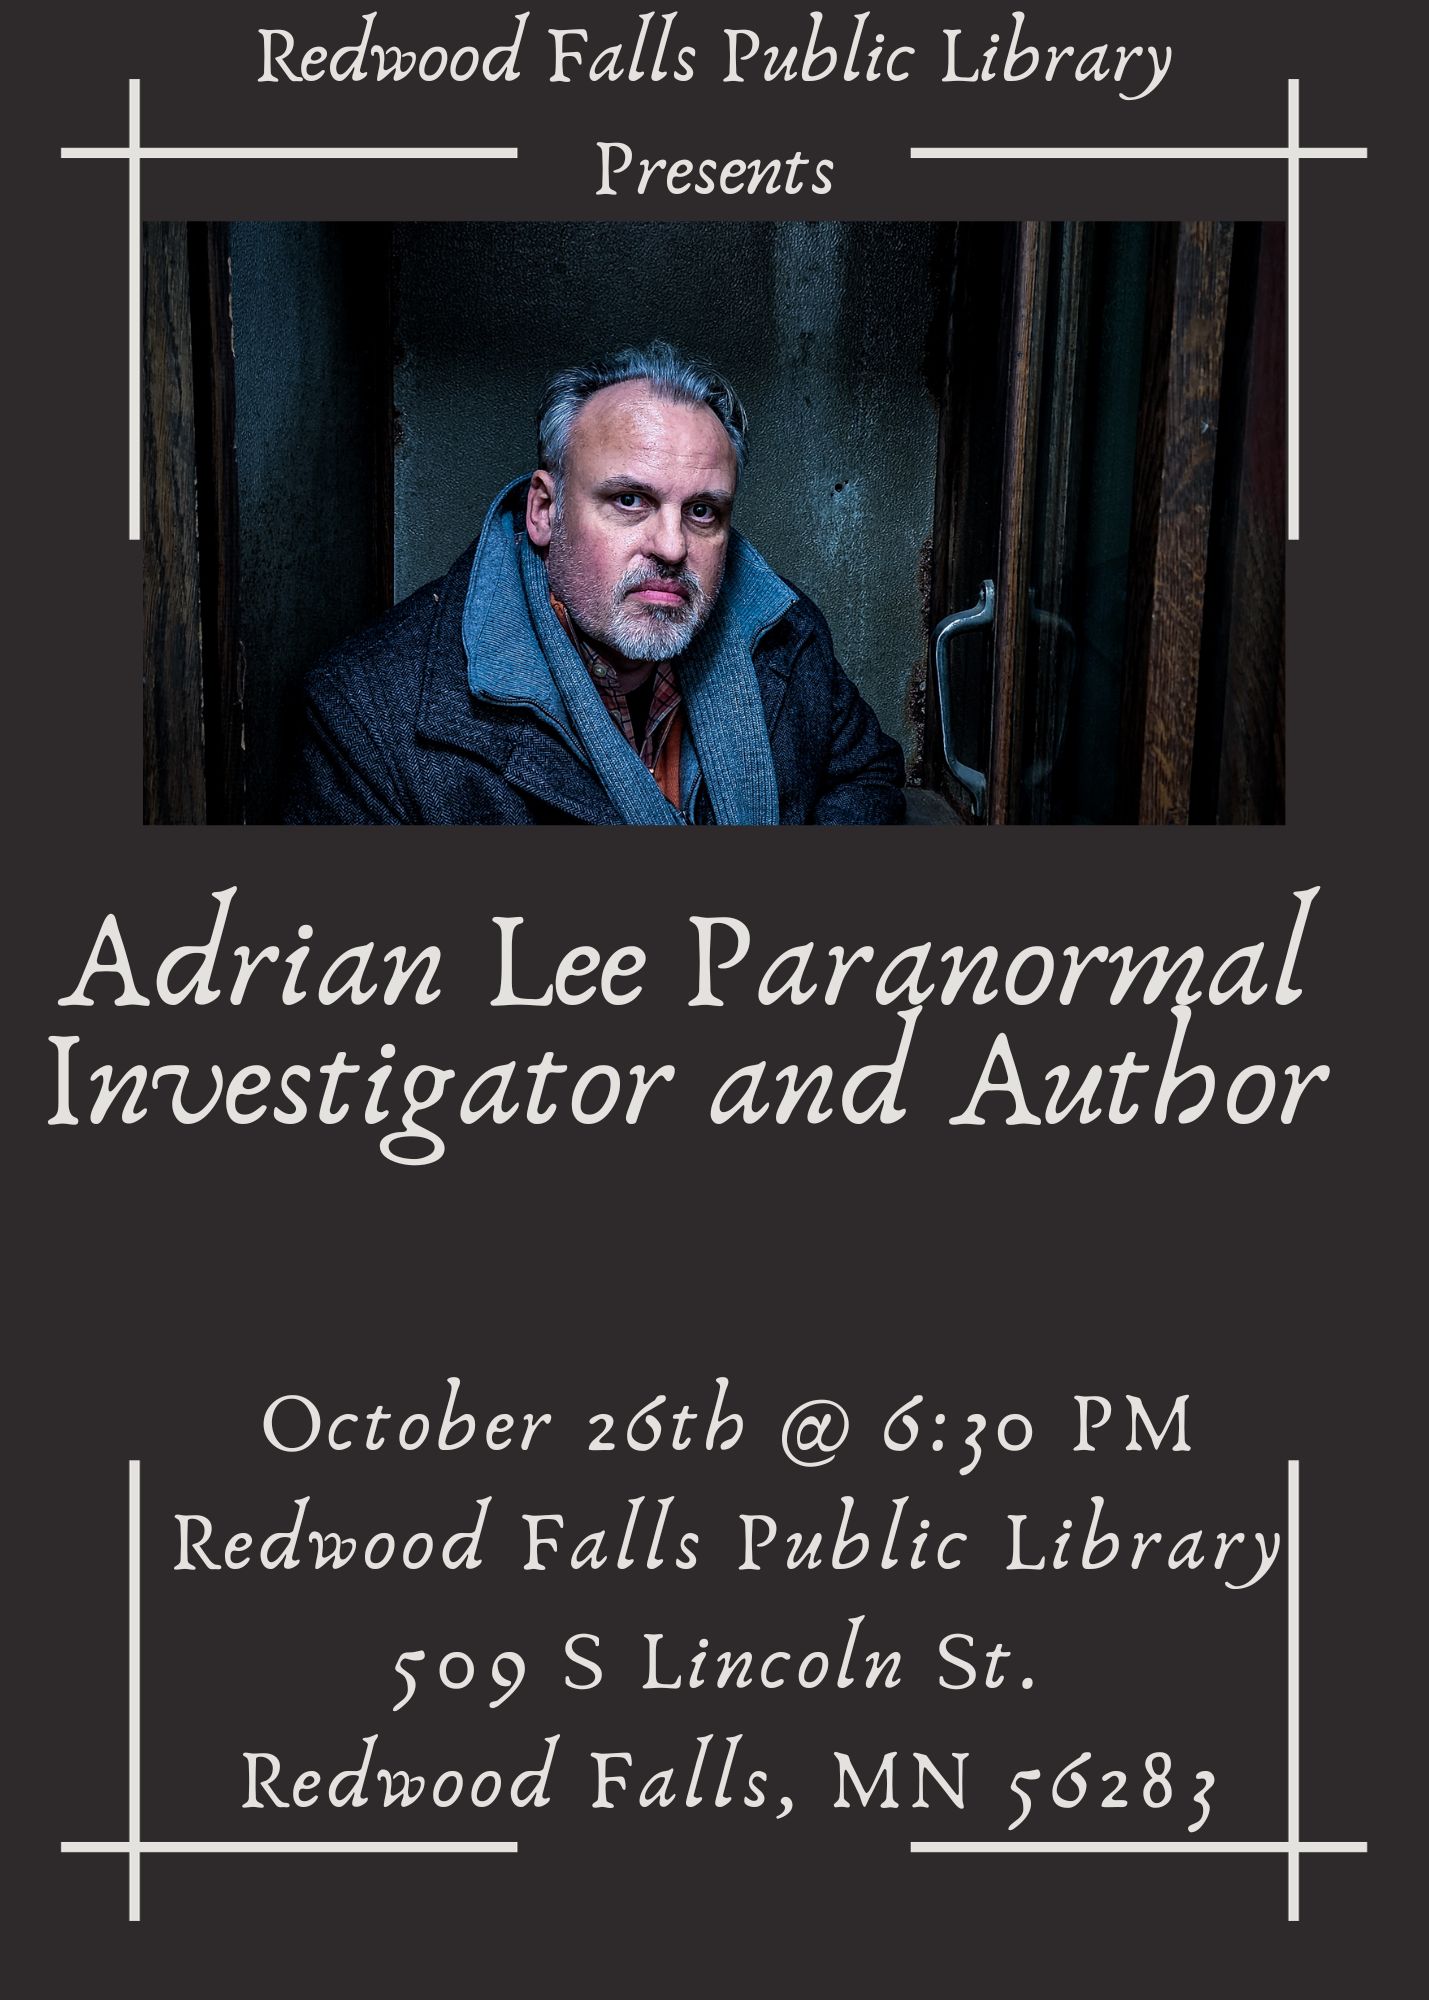 <h1 class="tribe-events-single-event-title">Adrian Lee Paranormal Investigator and Author</h1>